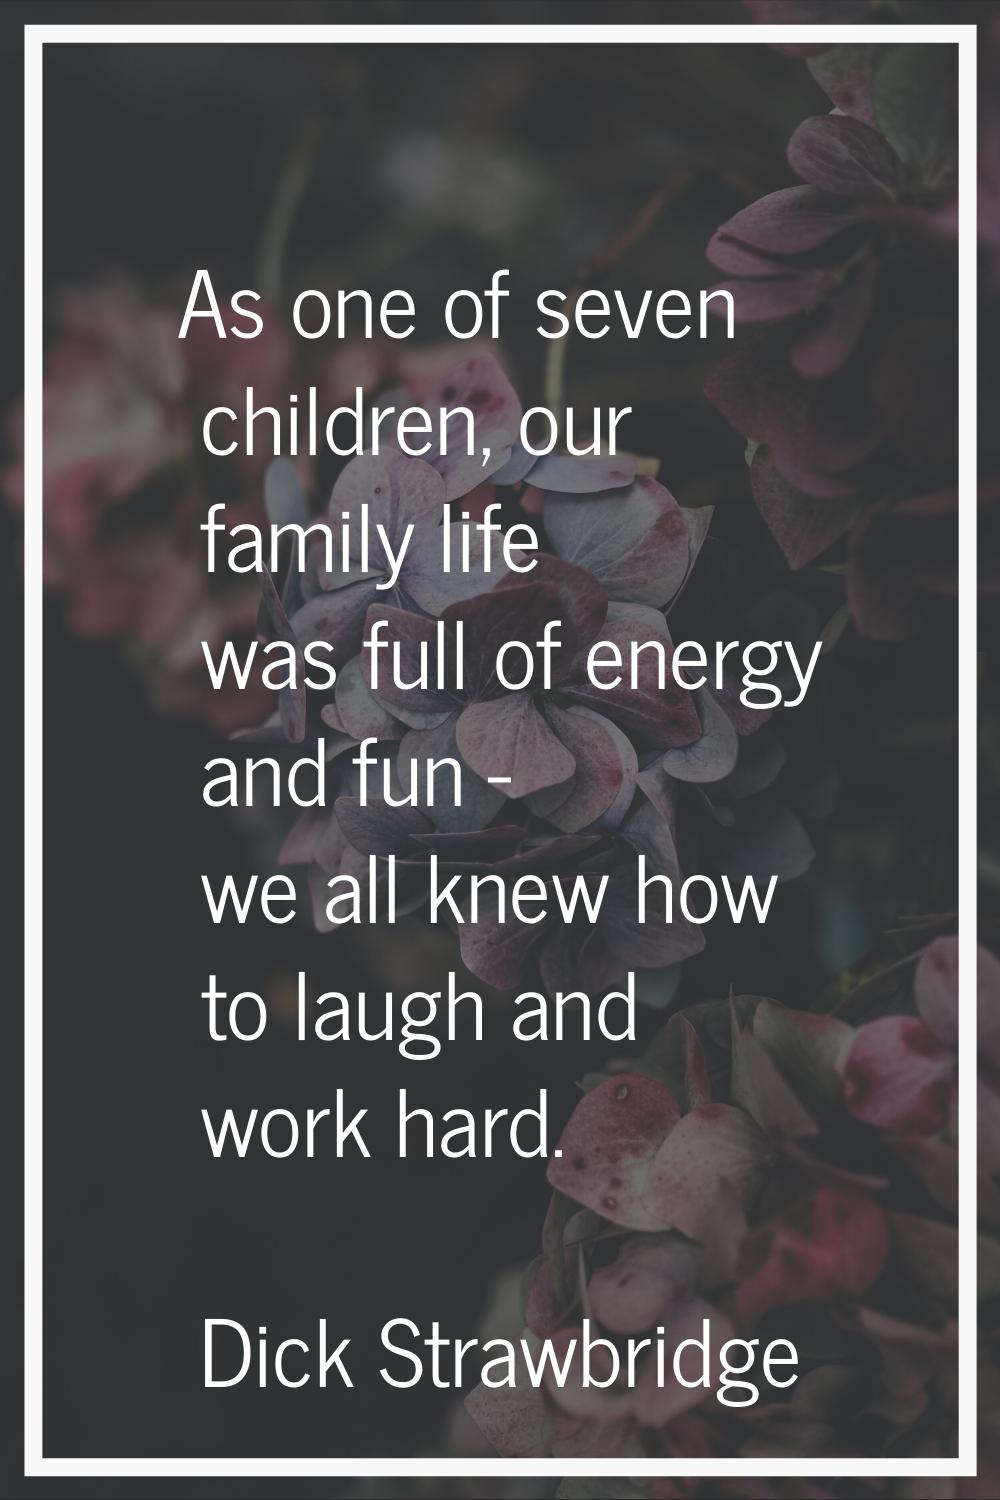 As one of seven children, our family life was full of energy and fun - we all knew how to laugh and